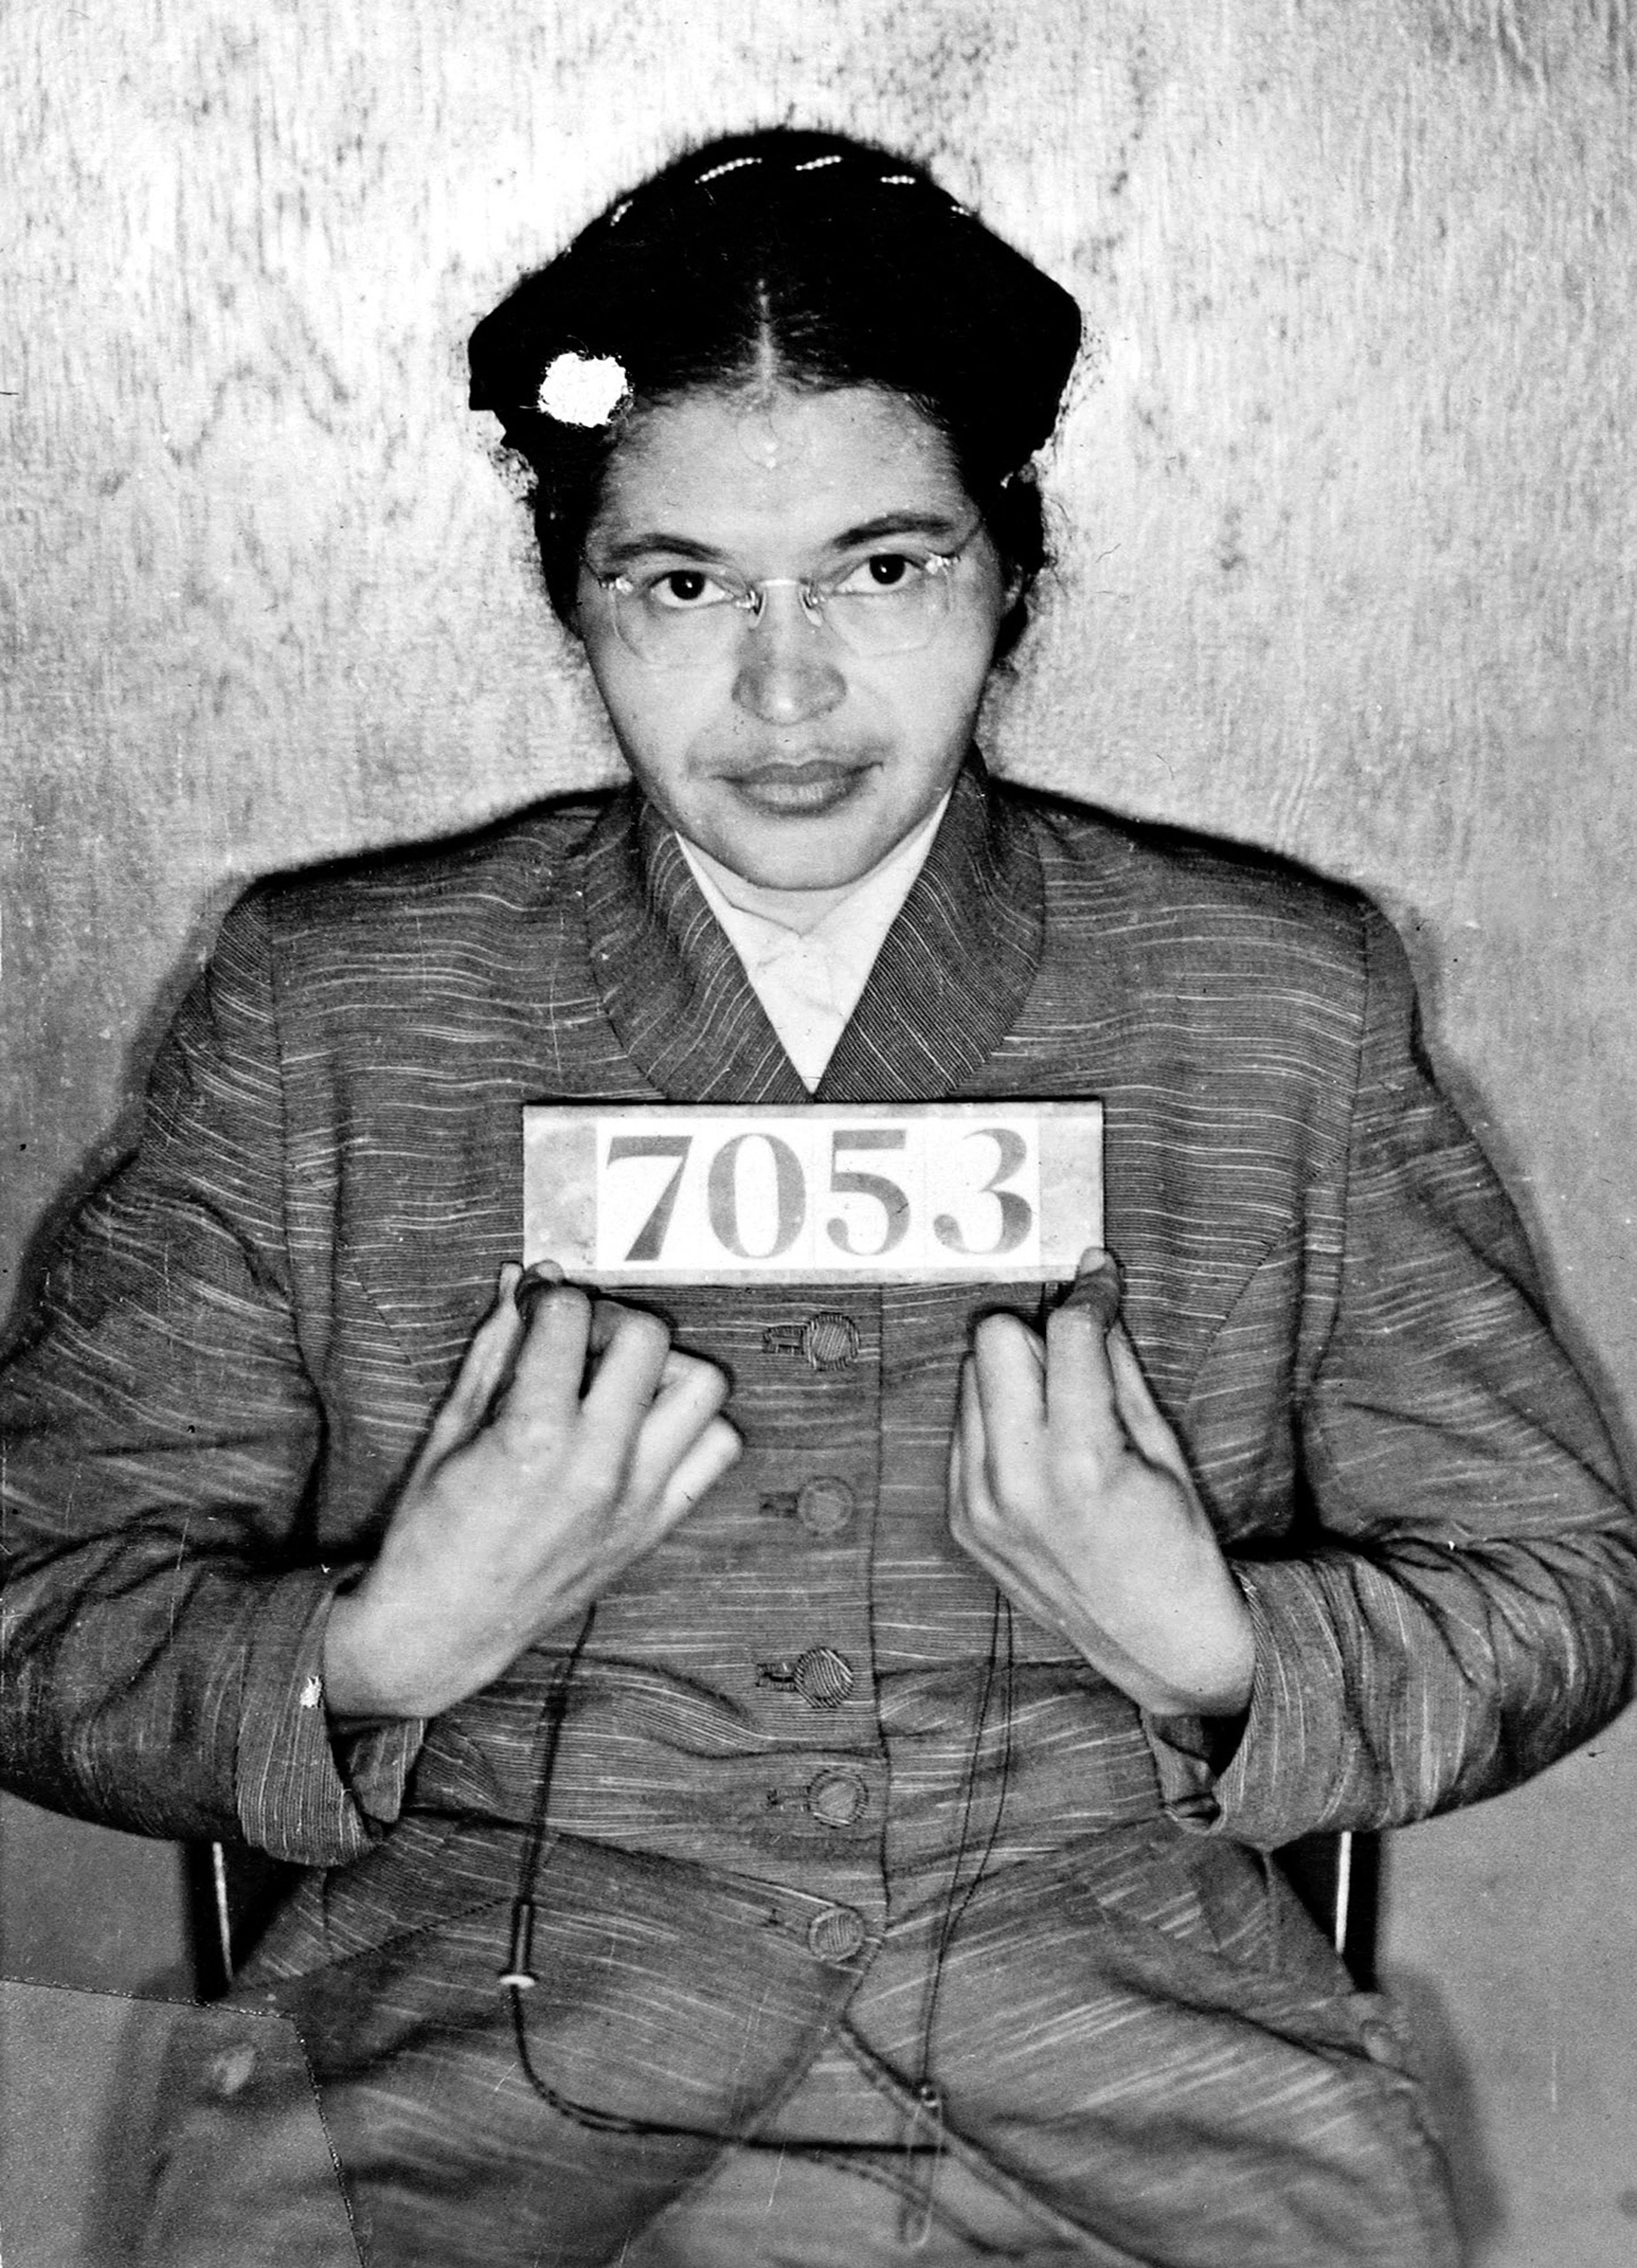 Booking photo of American Civil Rights activist Rosa Louise McCauley Parks taken at the time of her arrest for refusing to give up her seat on a Montgomery, Ala., bus to a white passenger on Dec. 1, 1955.